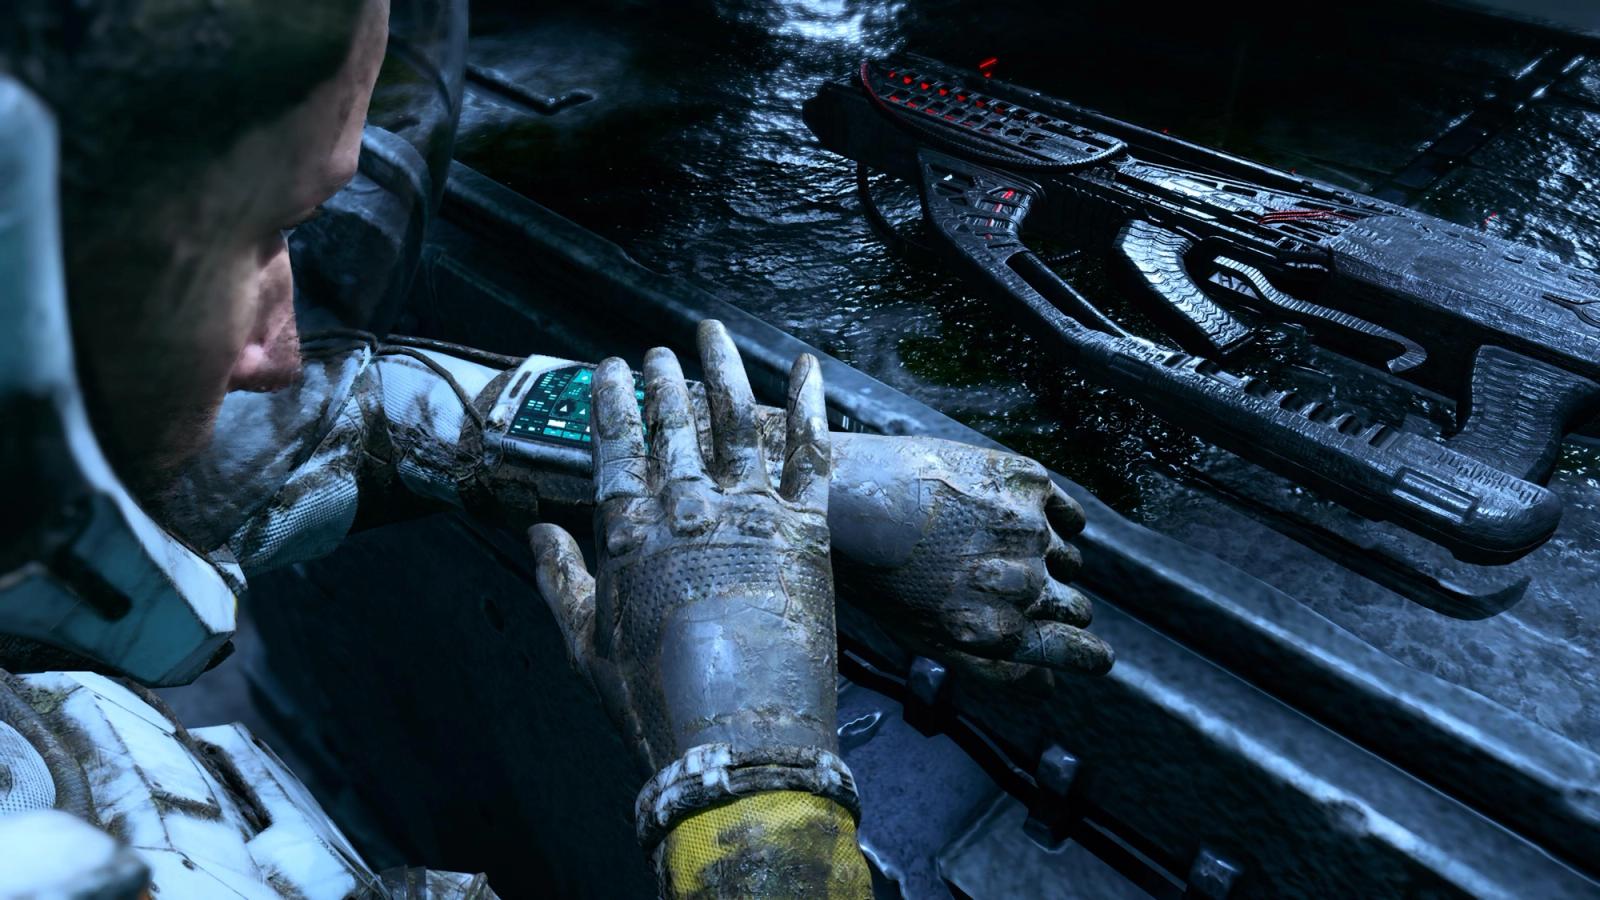 Selene takes a look at her suit system wrist monitor display in Returnal